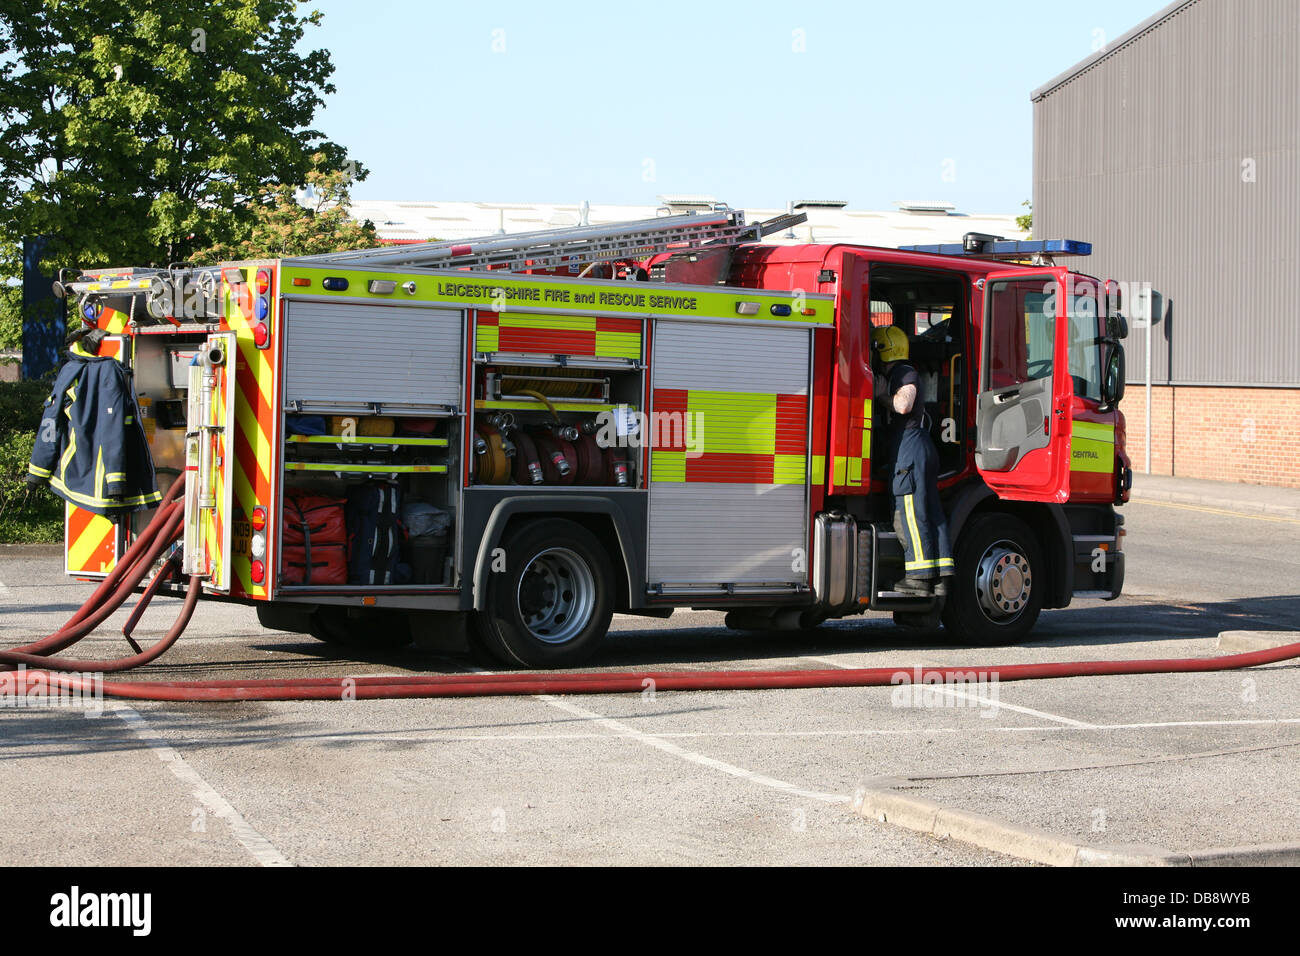 fire engine and firefighter at scene of a fire Stock Photo